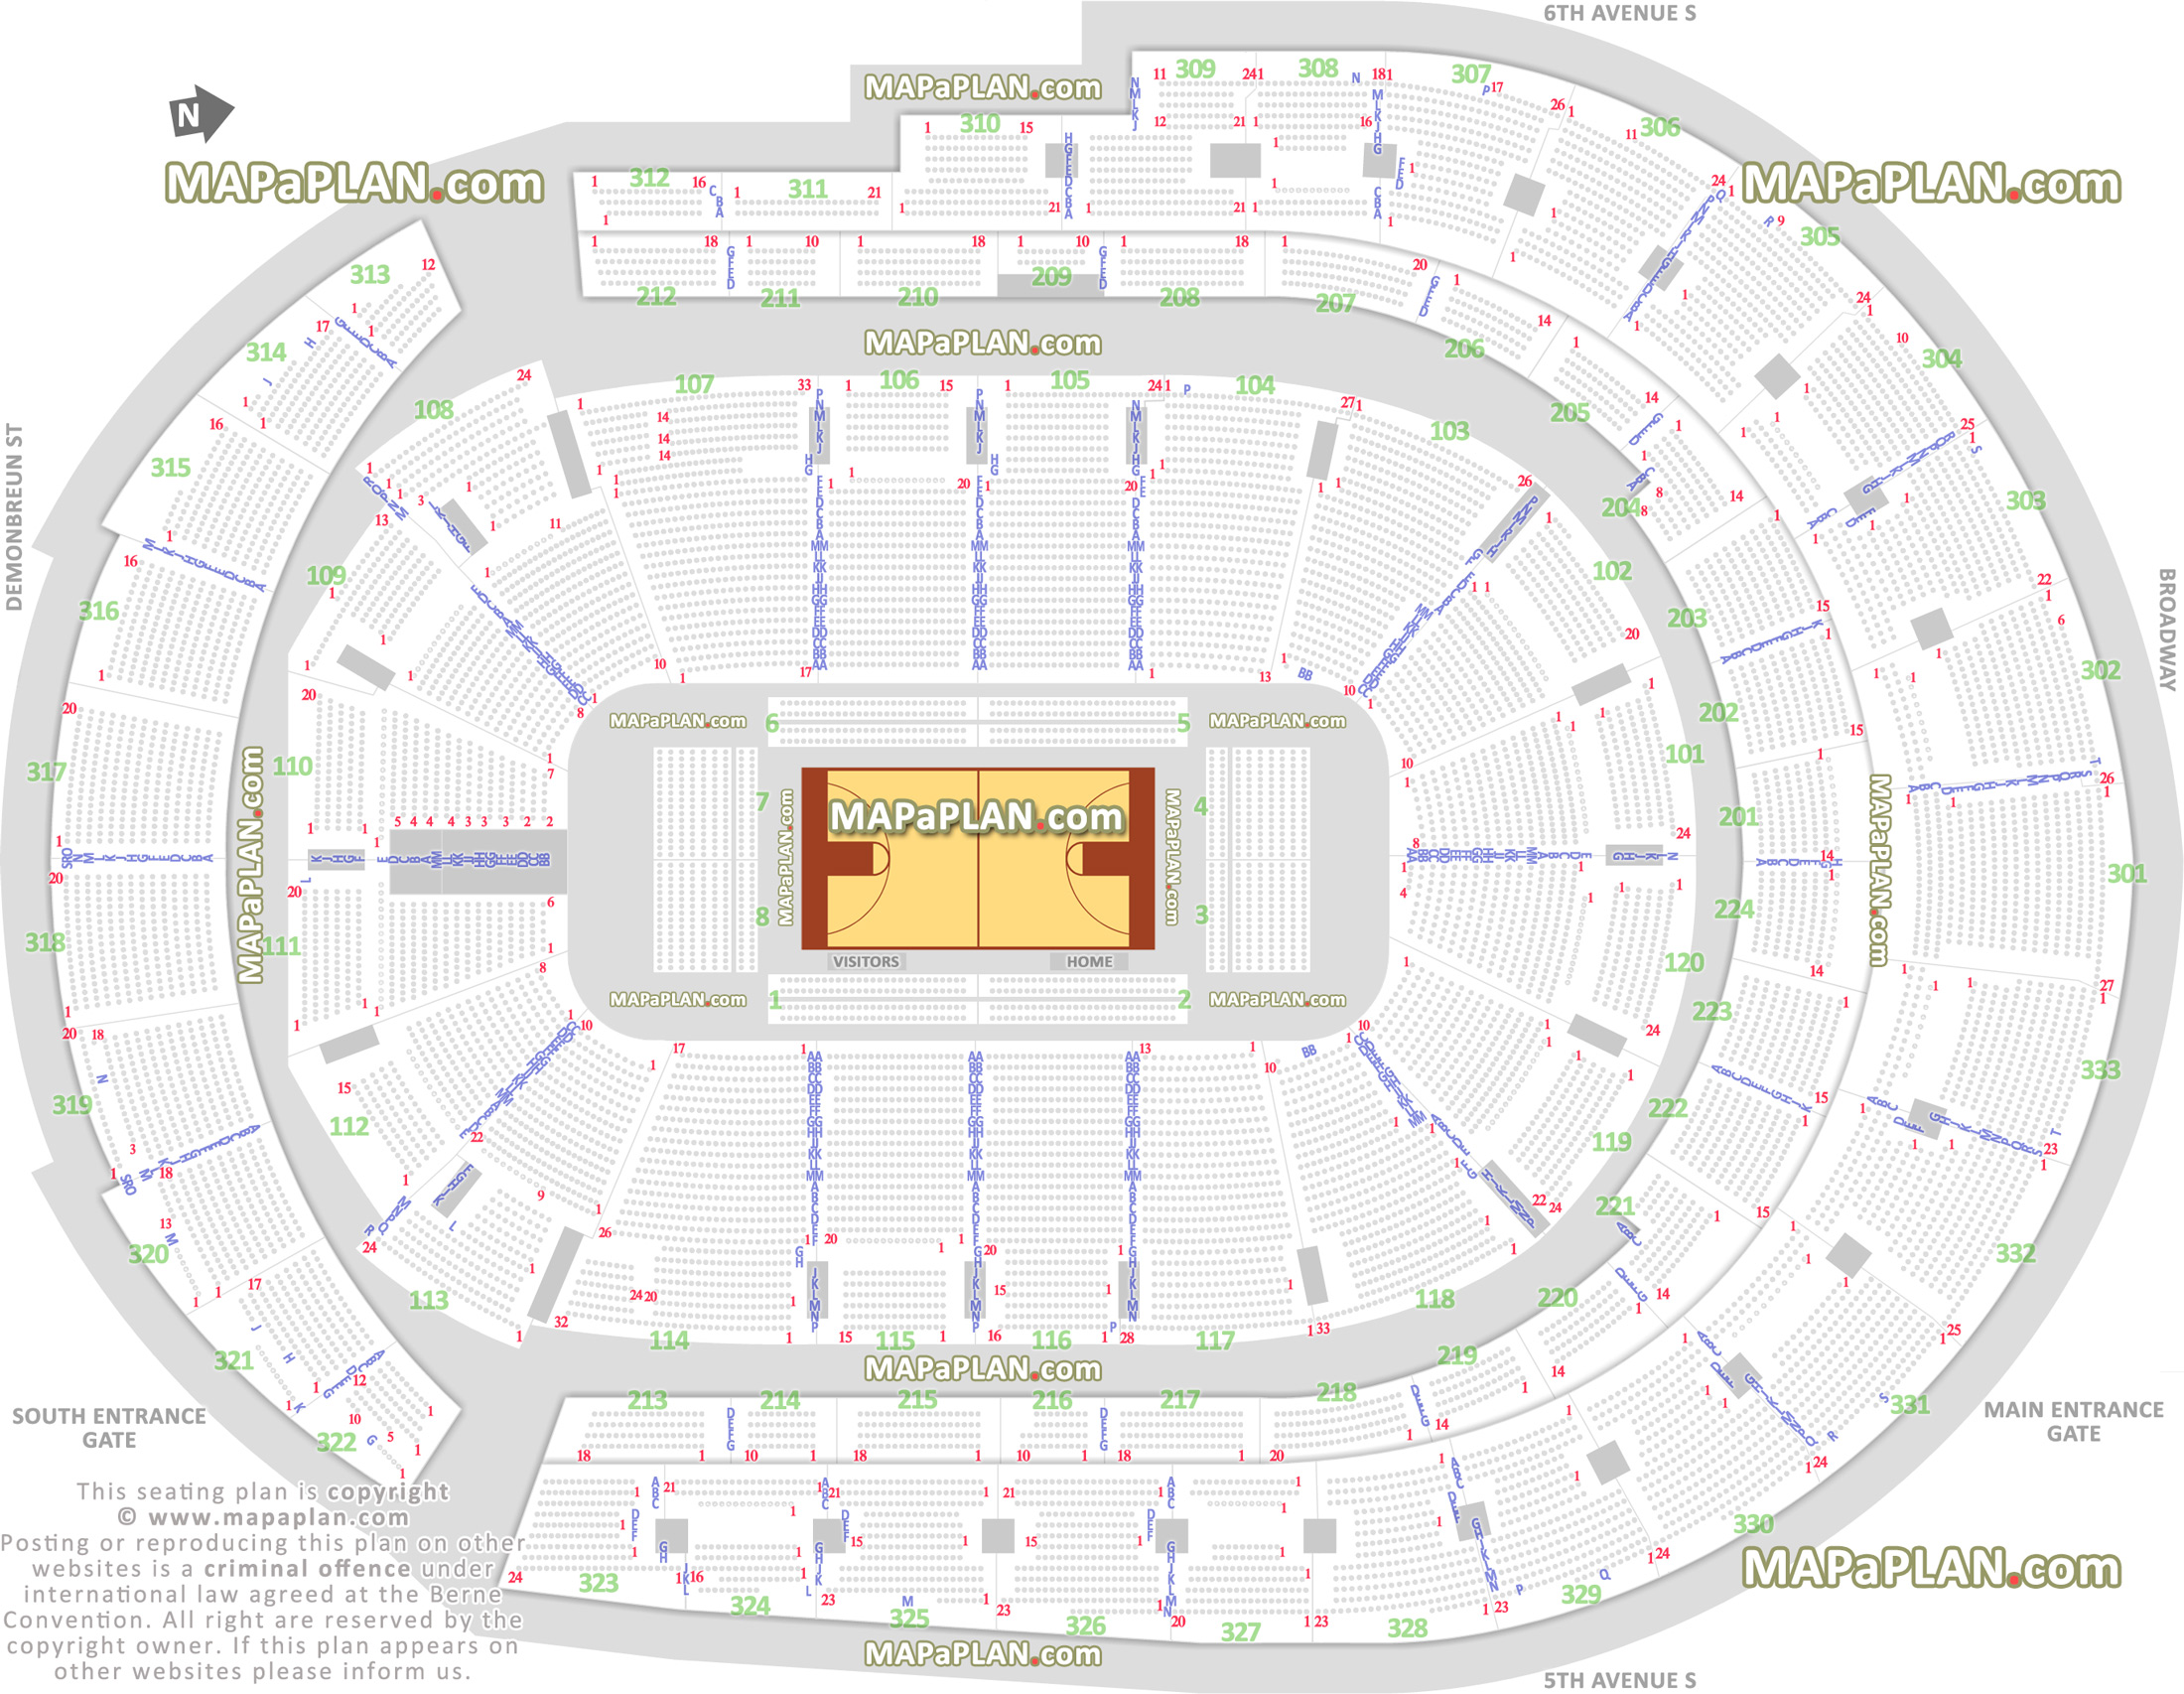 basketball ncaa sec tournament arena court sideline baseline courtside lexus inner circle front second row how seats numbered Nashville Bridgestone Arena seating chart